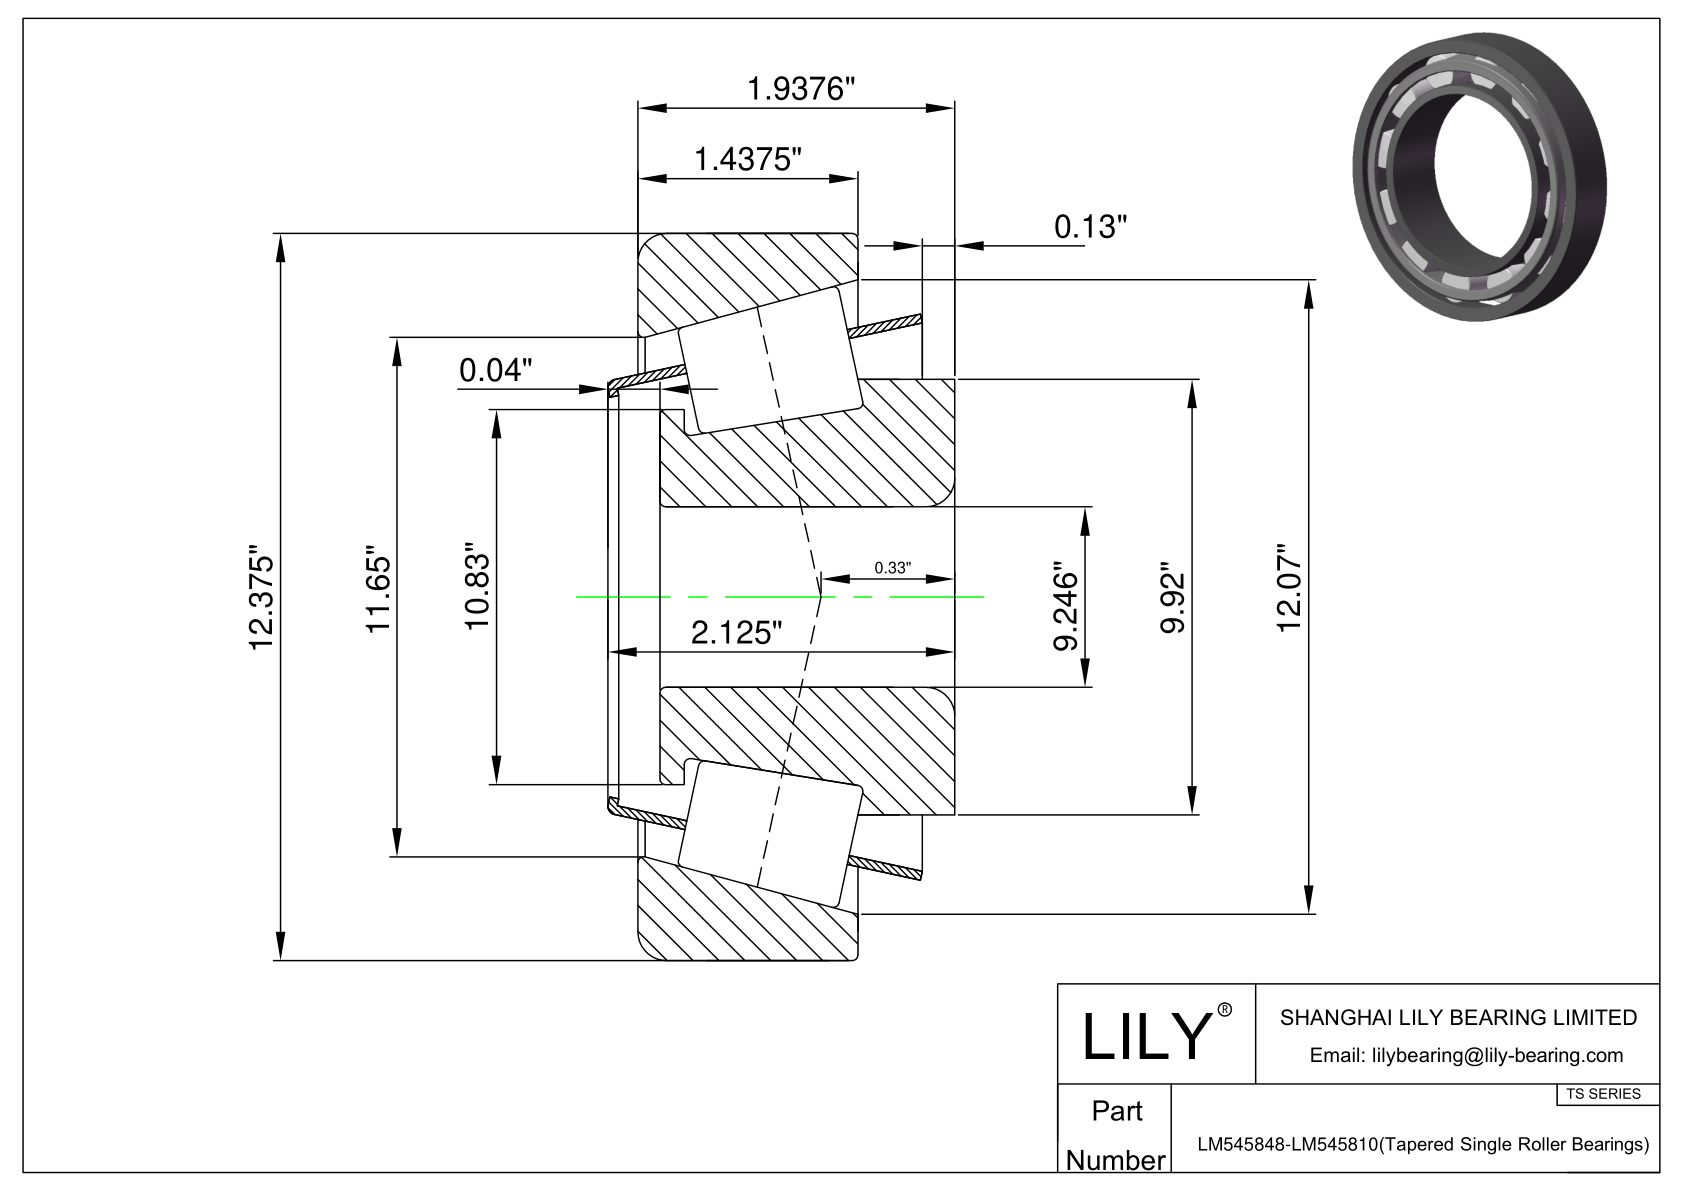 LM545848-LM545810 TS (Tapered Single Roller Bearings) (Imperial) cad drawing